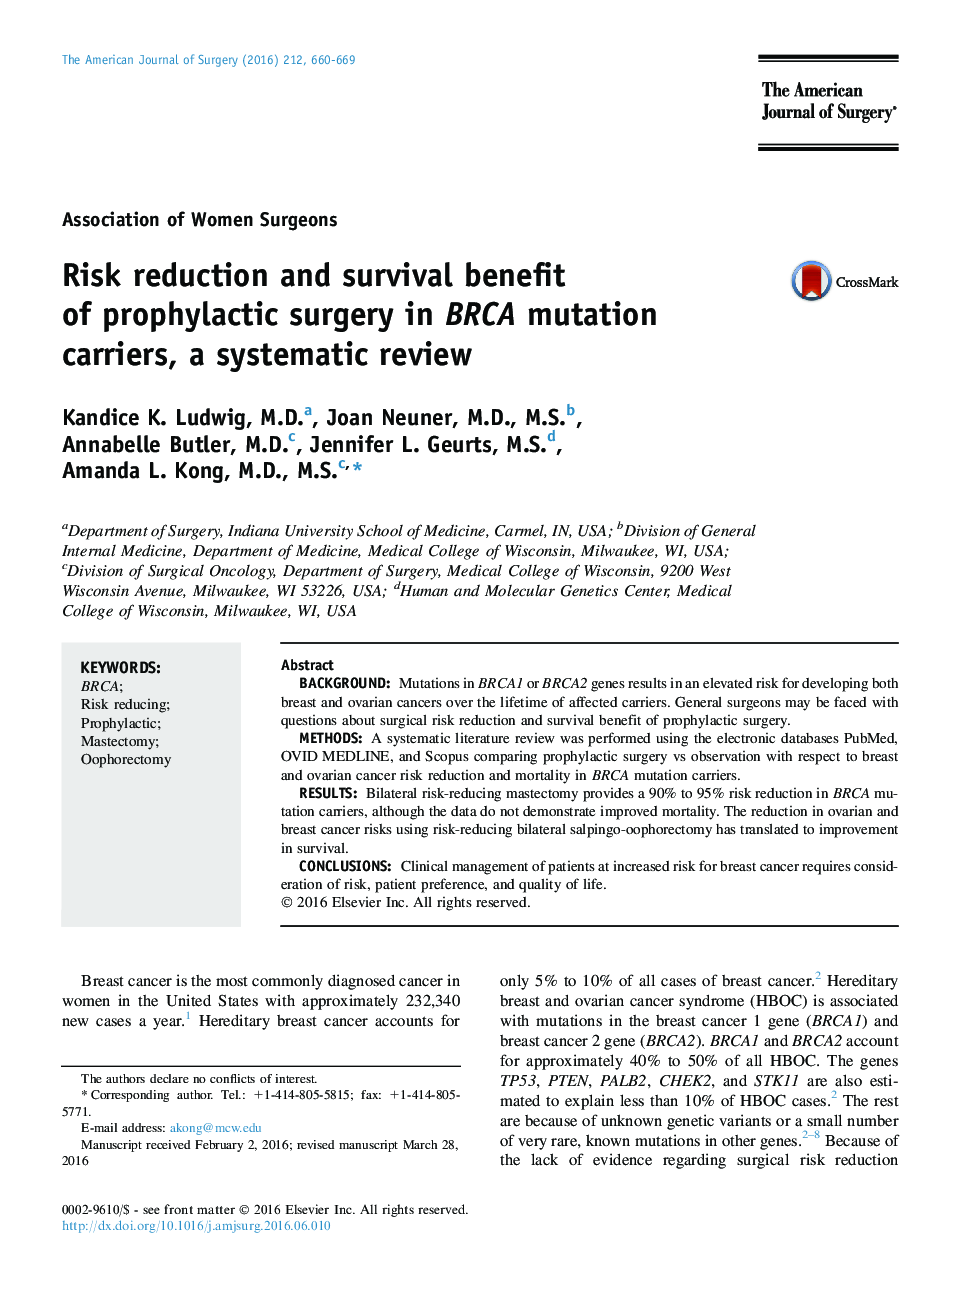 Risk reduction and survival benefit of prophylactic surgery in BRCA mutation carriers, a systematic review 